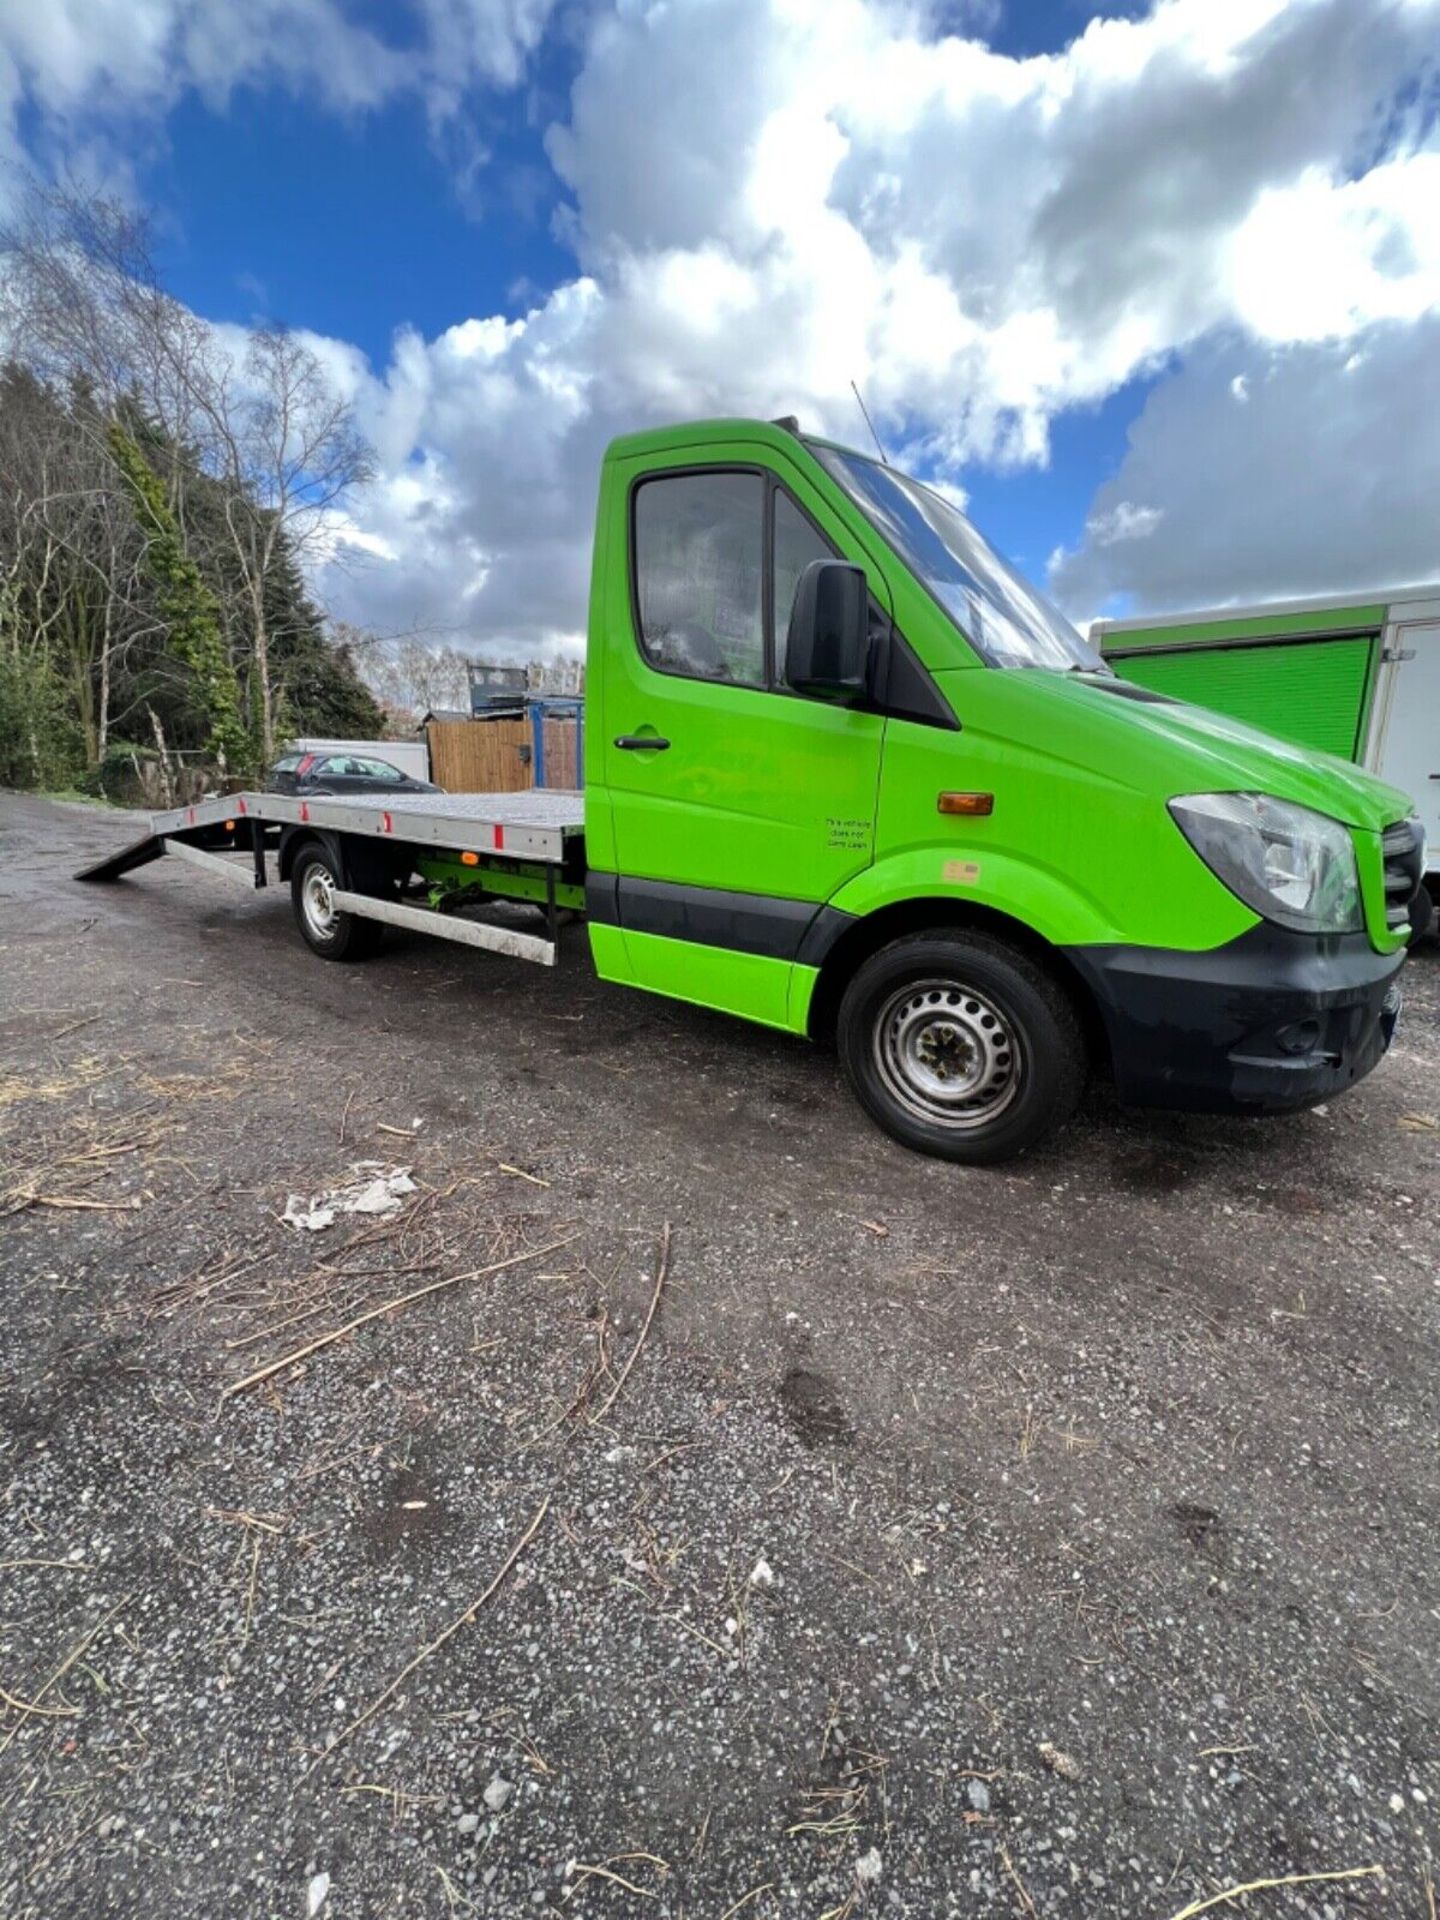 2017 MERCEDES SPRINTER RECOVERY TRUCK - 314 CDI FULL BED - EURO 6 - Image 2 of 23